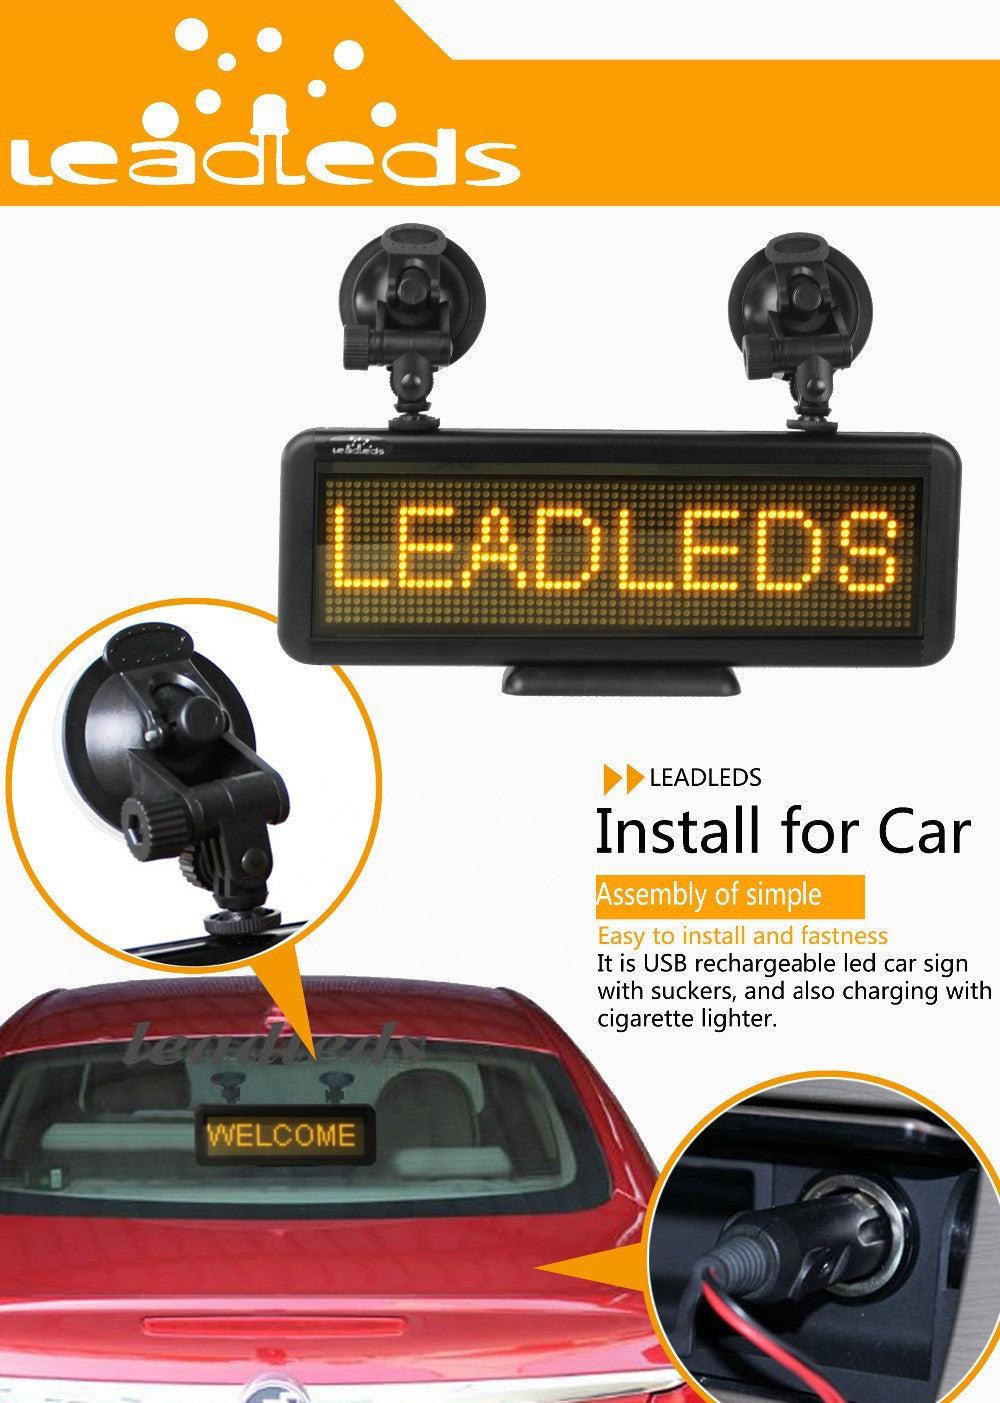 17” RED LED Car Display USB Rechargeable Led Business Sign LED Programmable Message Sign - Leadleds